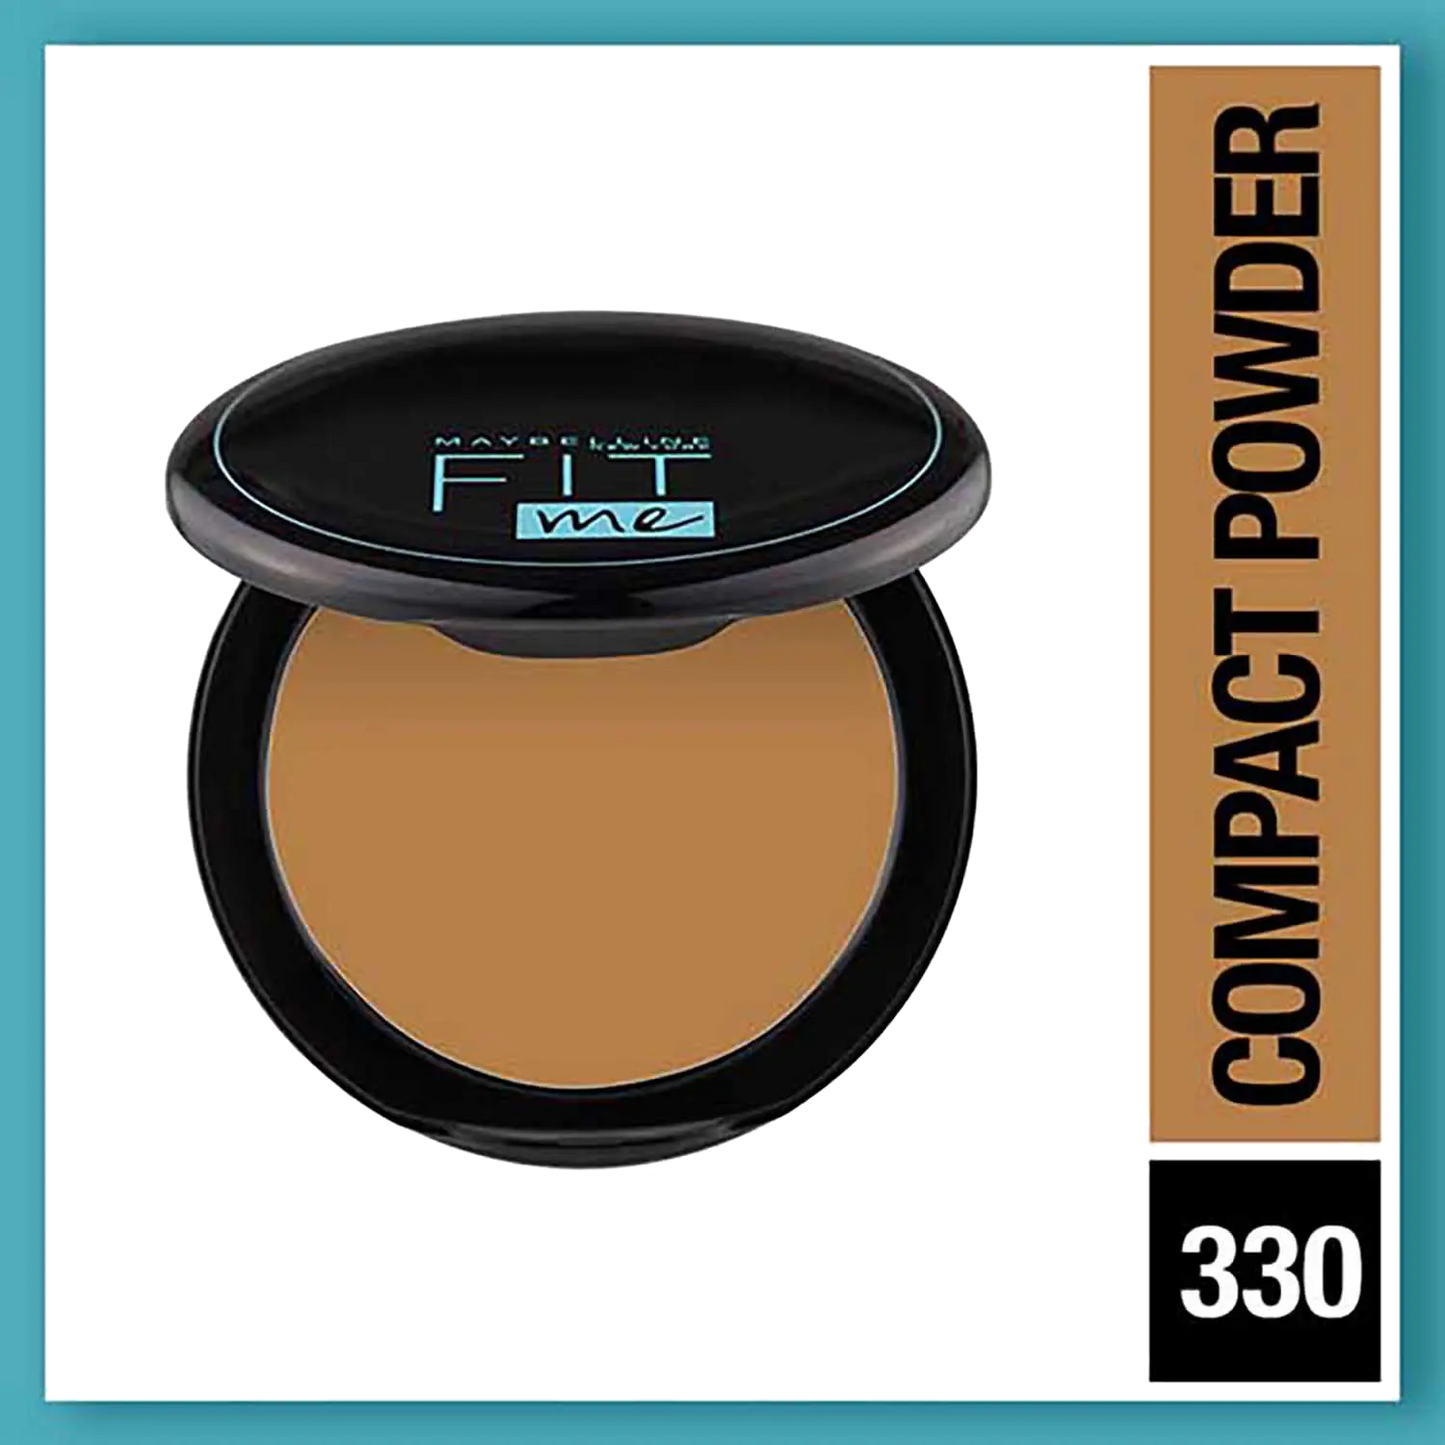 Maybelline New York Fit Me Compact Powder - 330 Toffee (8g)